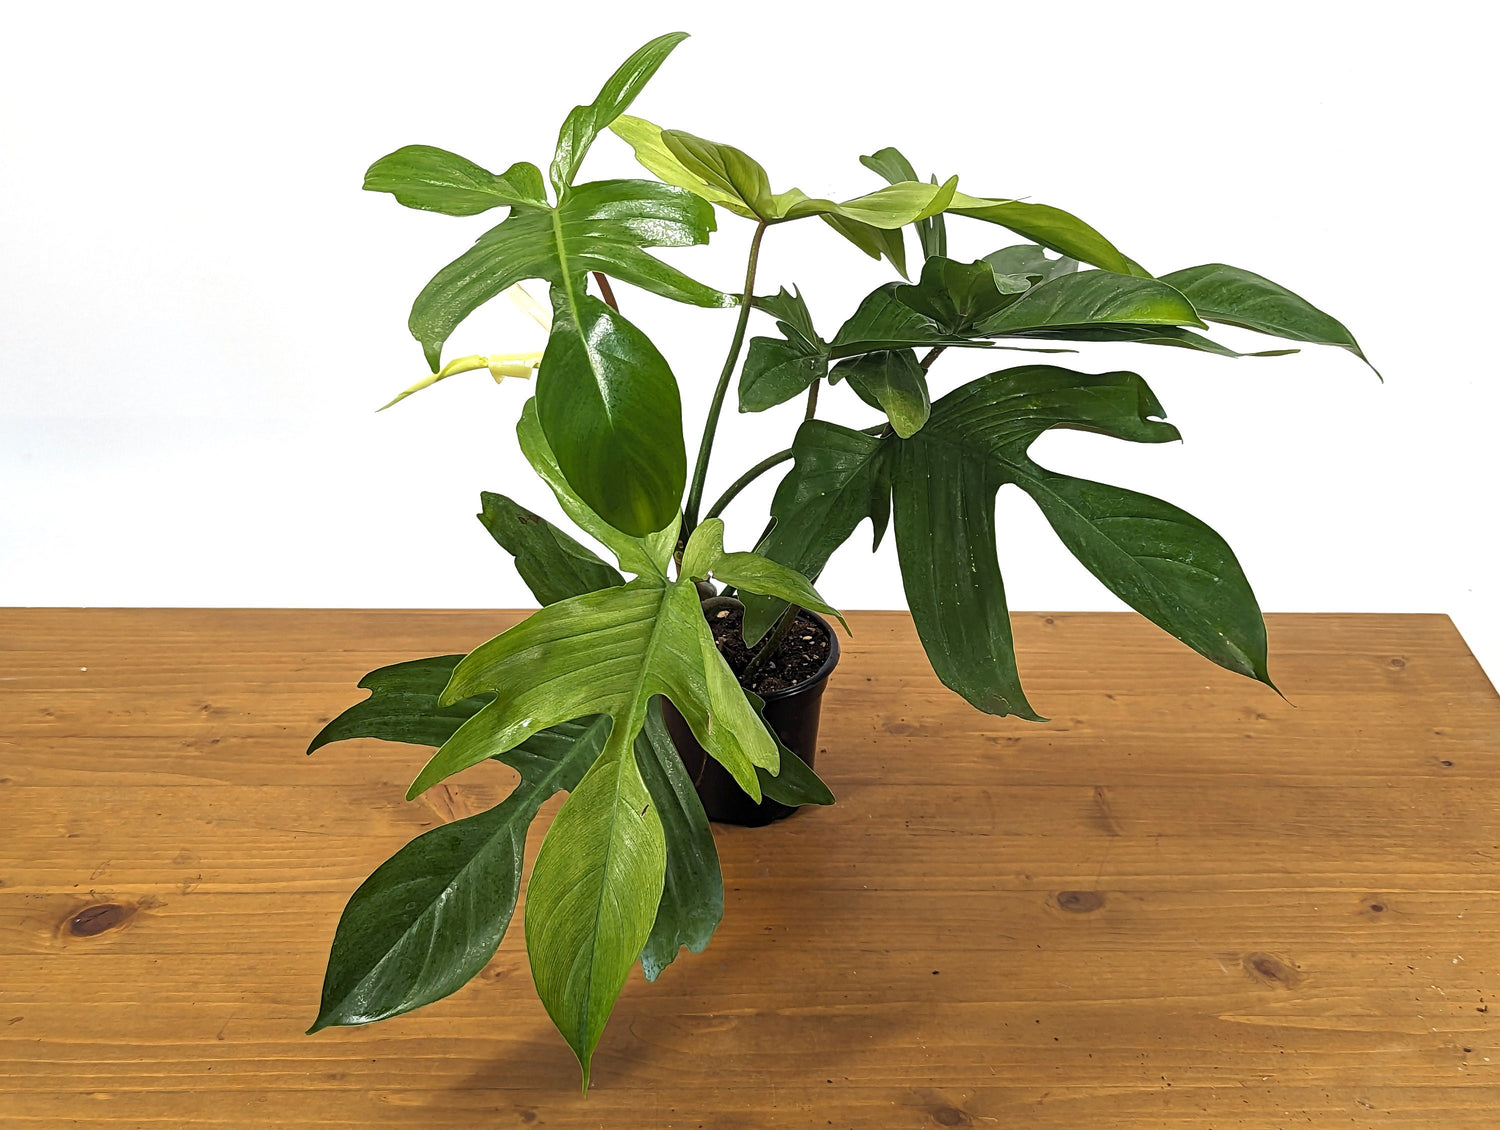 EXACT XL Philodendron Florida Ghost Mint Half Moon - Rooted Plants in 4 Inch Pot 